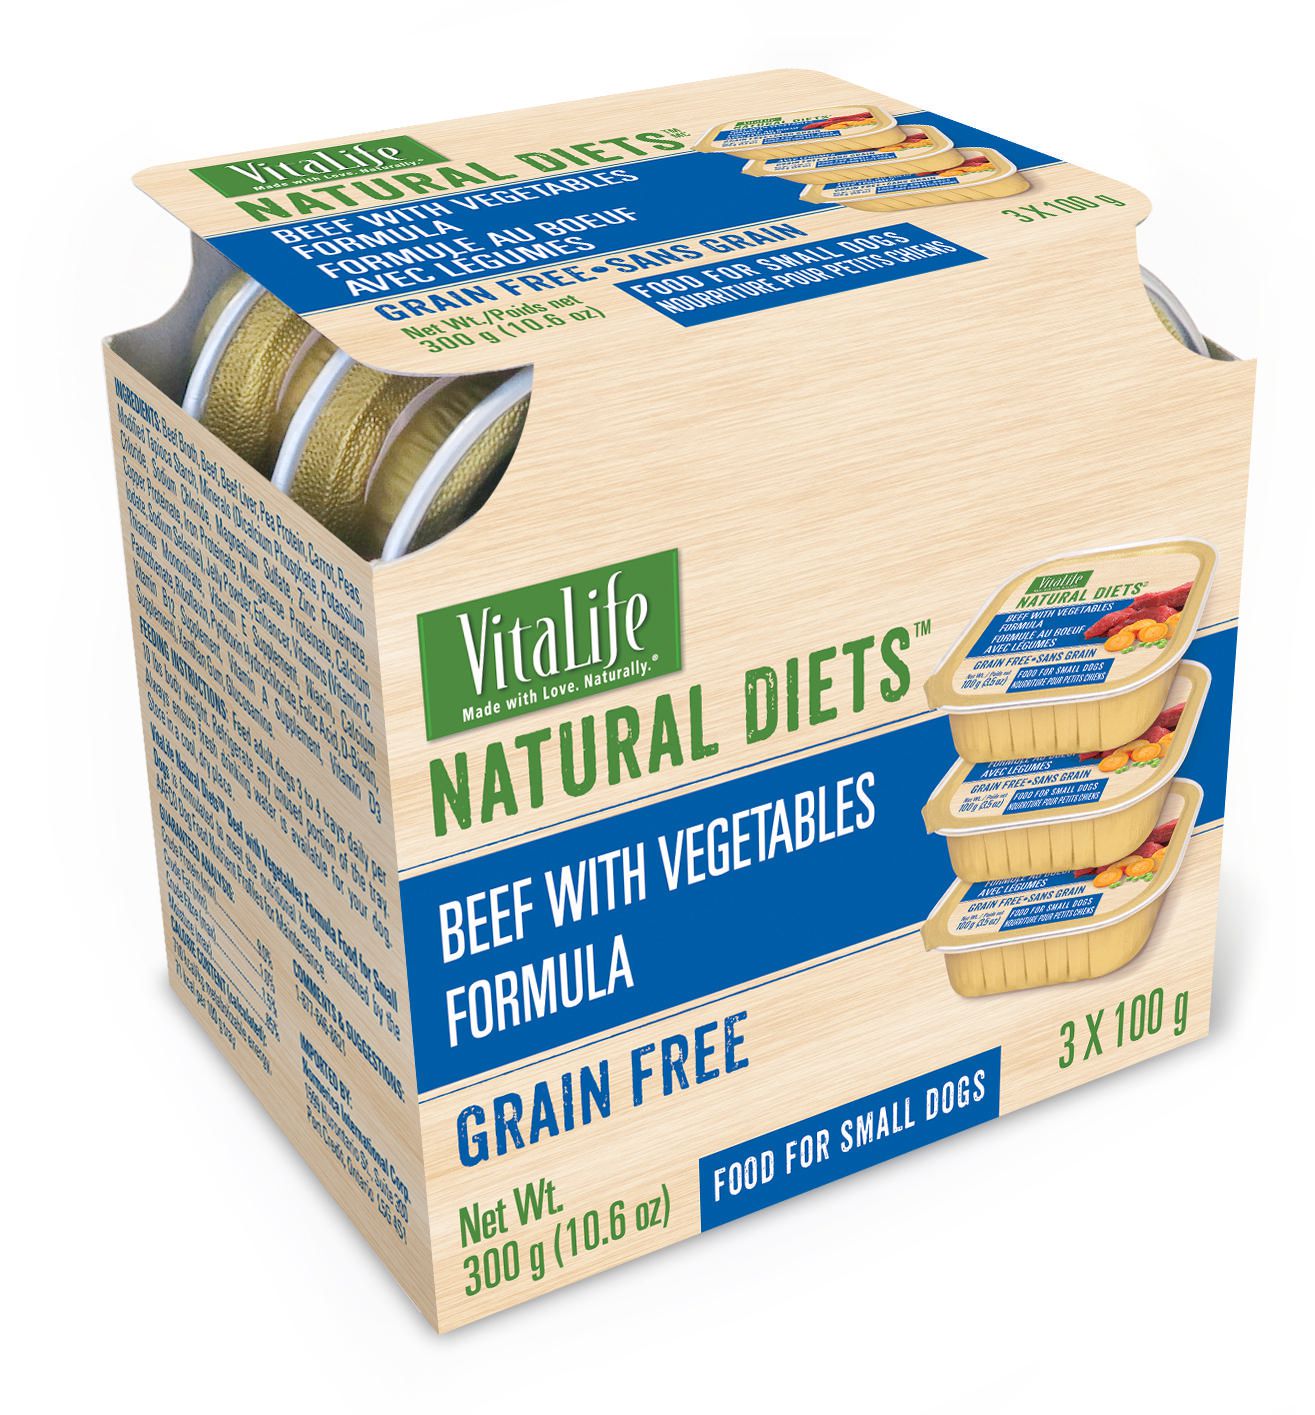 VitaLife Natural Diets Small Dog Food Beef & Vegetables Grain Free